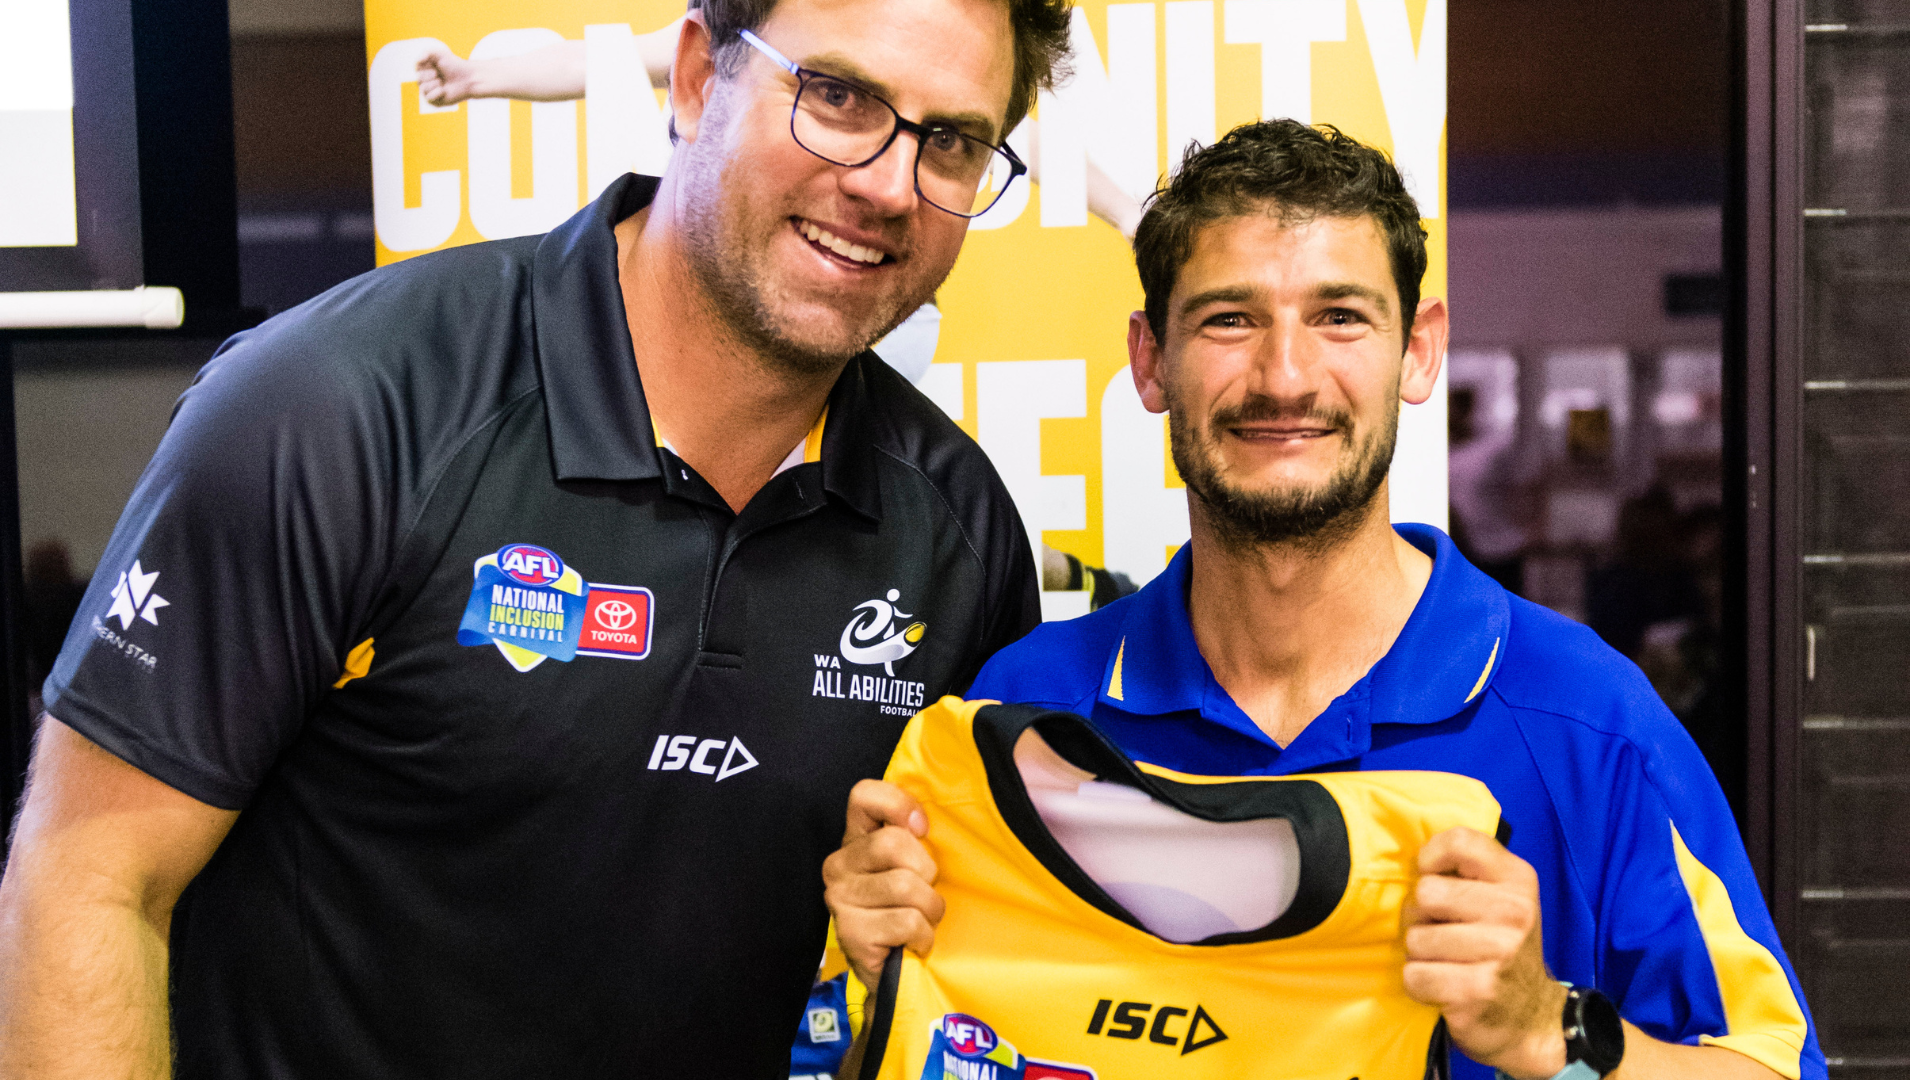 Two men smiling, holding a football jumper